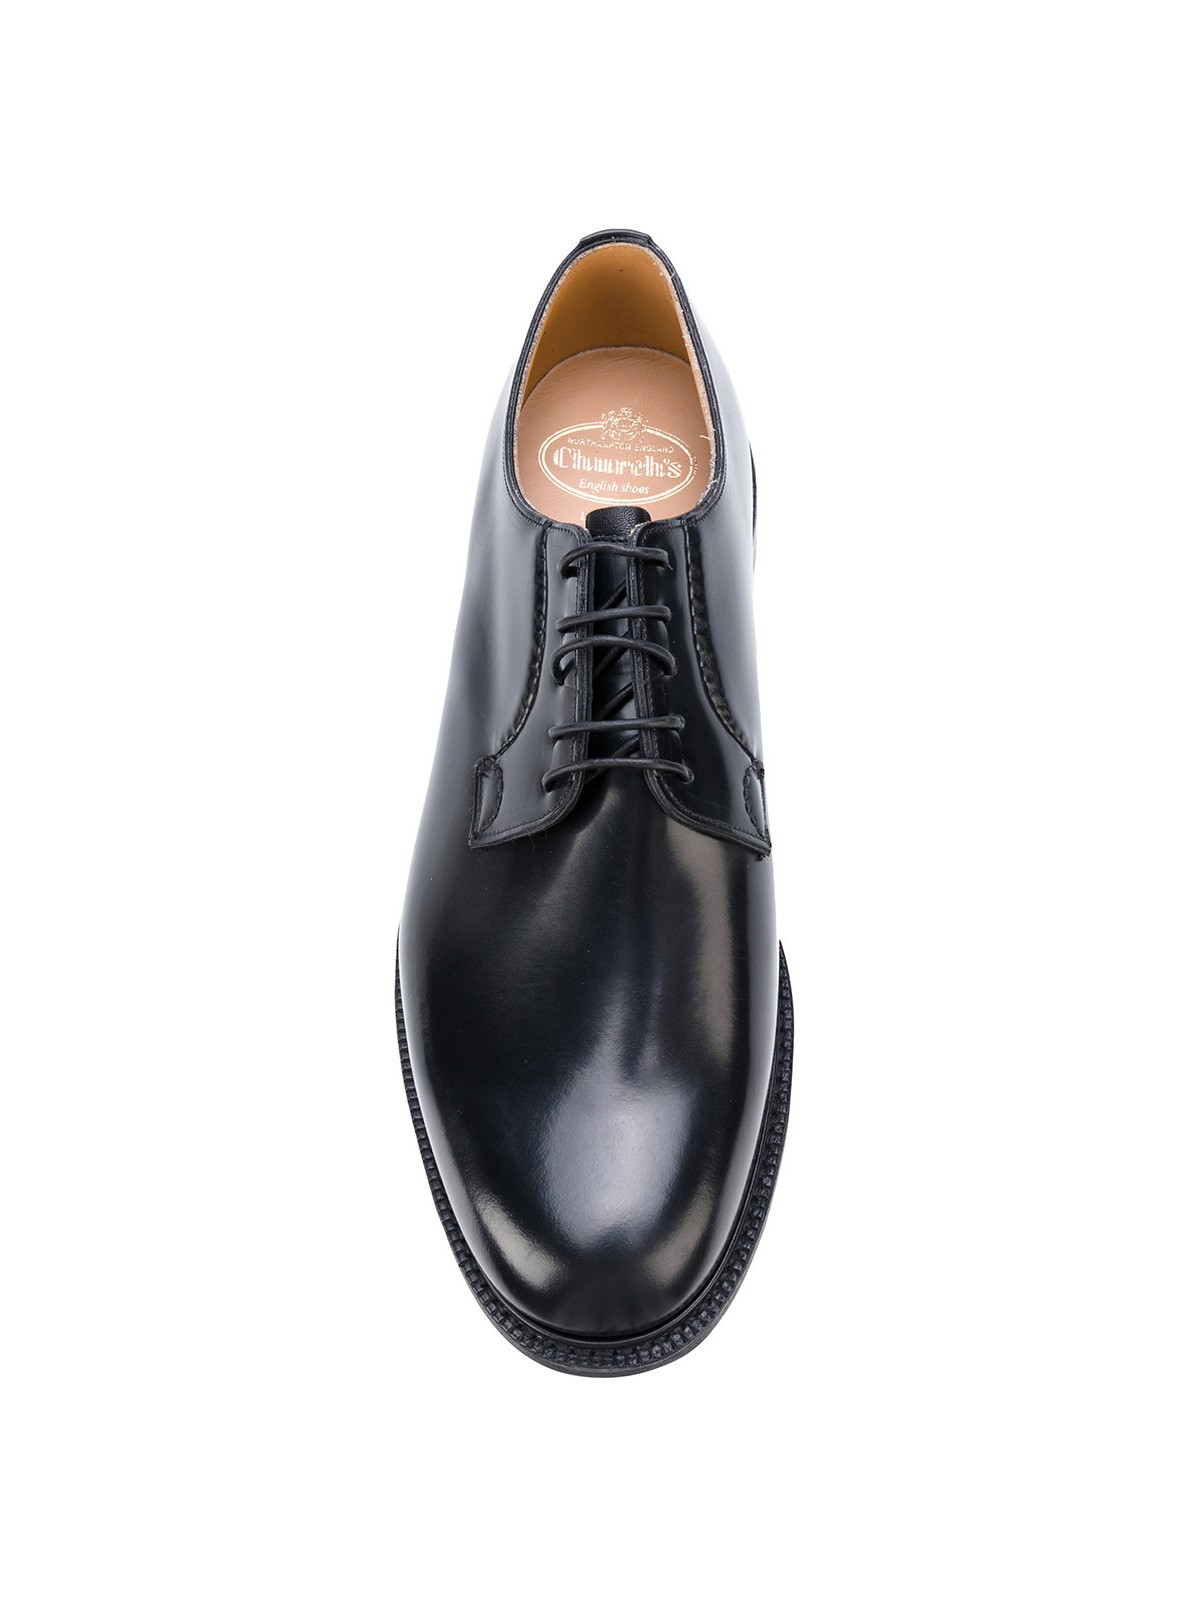 church's shannon derby shoes